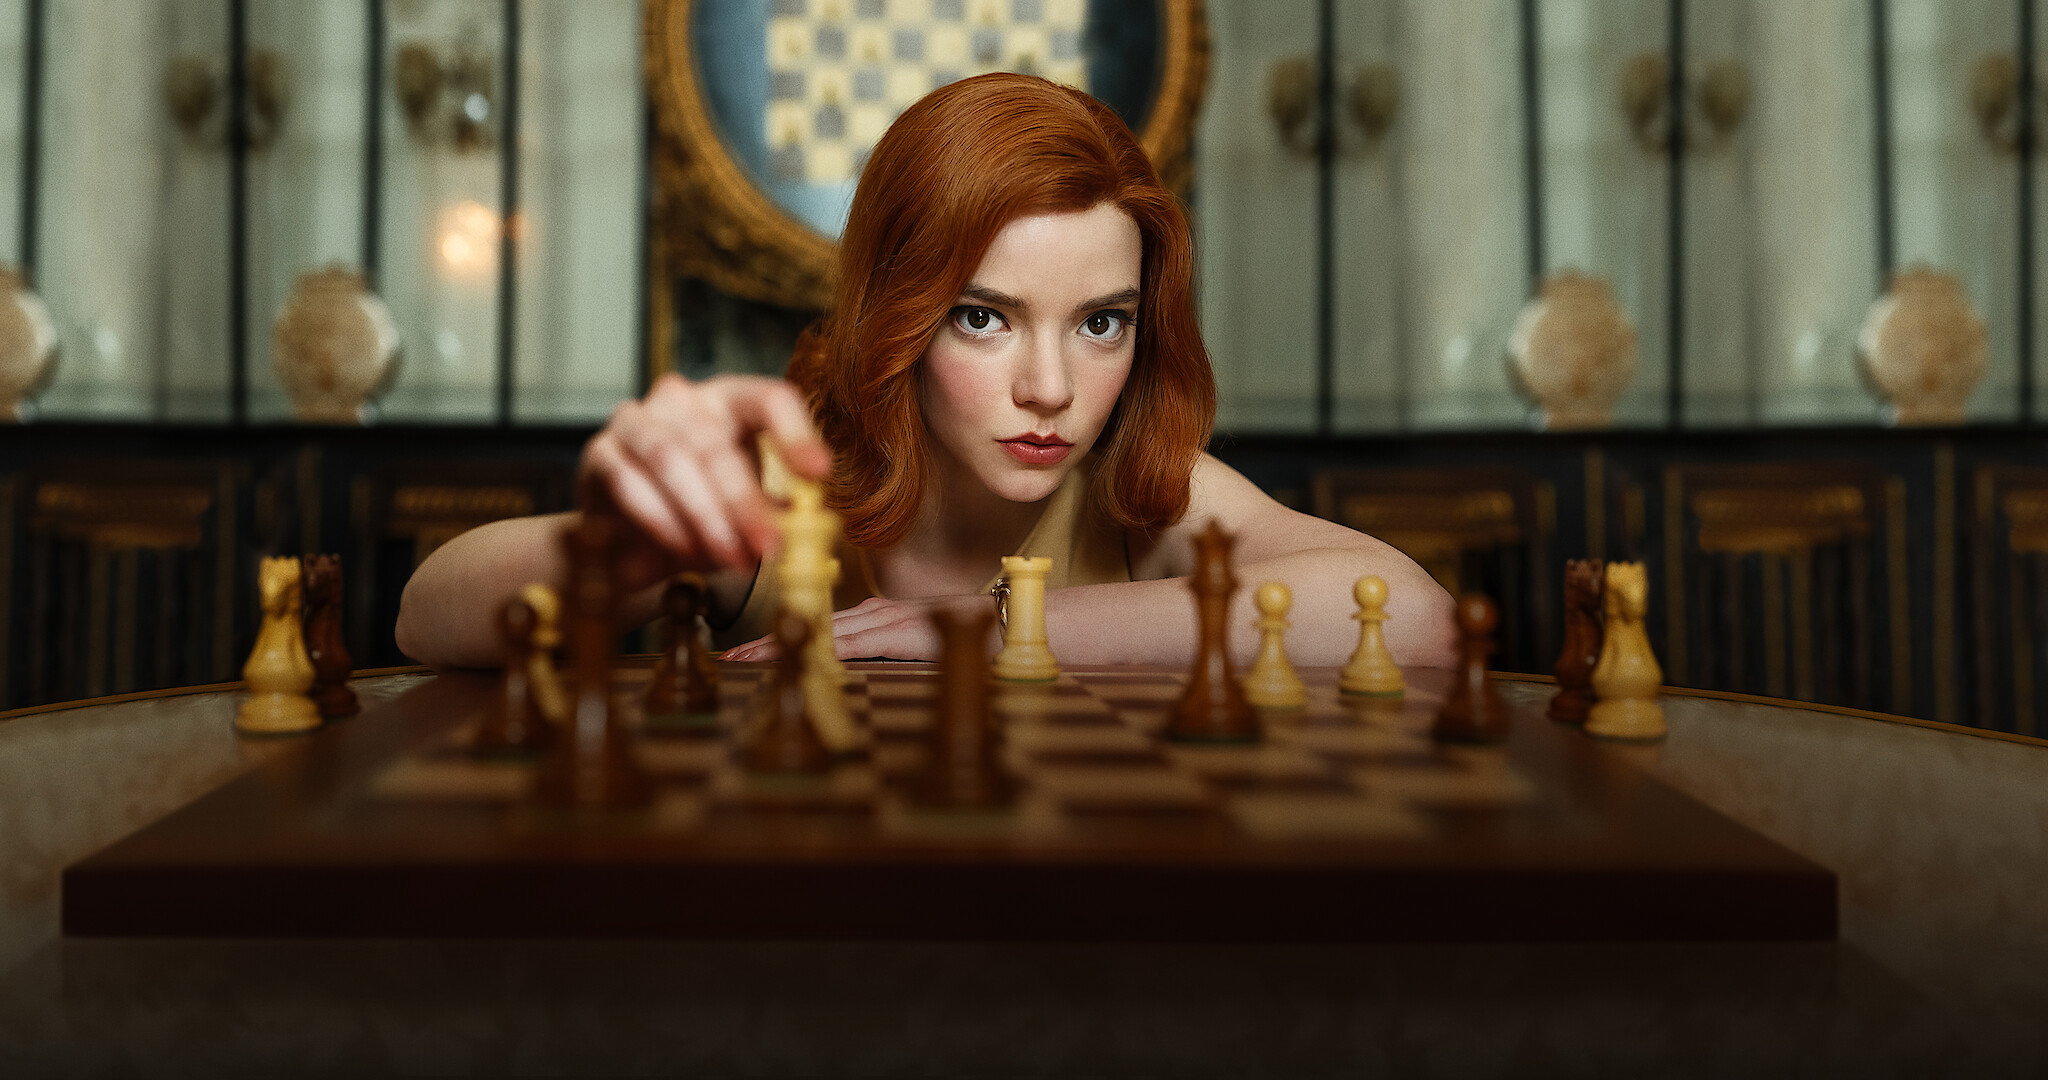 The Queen's Gambit: How Is a Show With So Little Sex So Sexy?